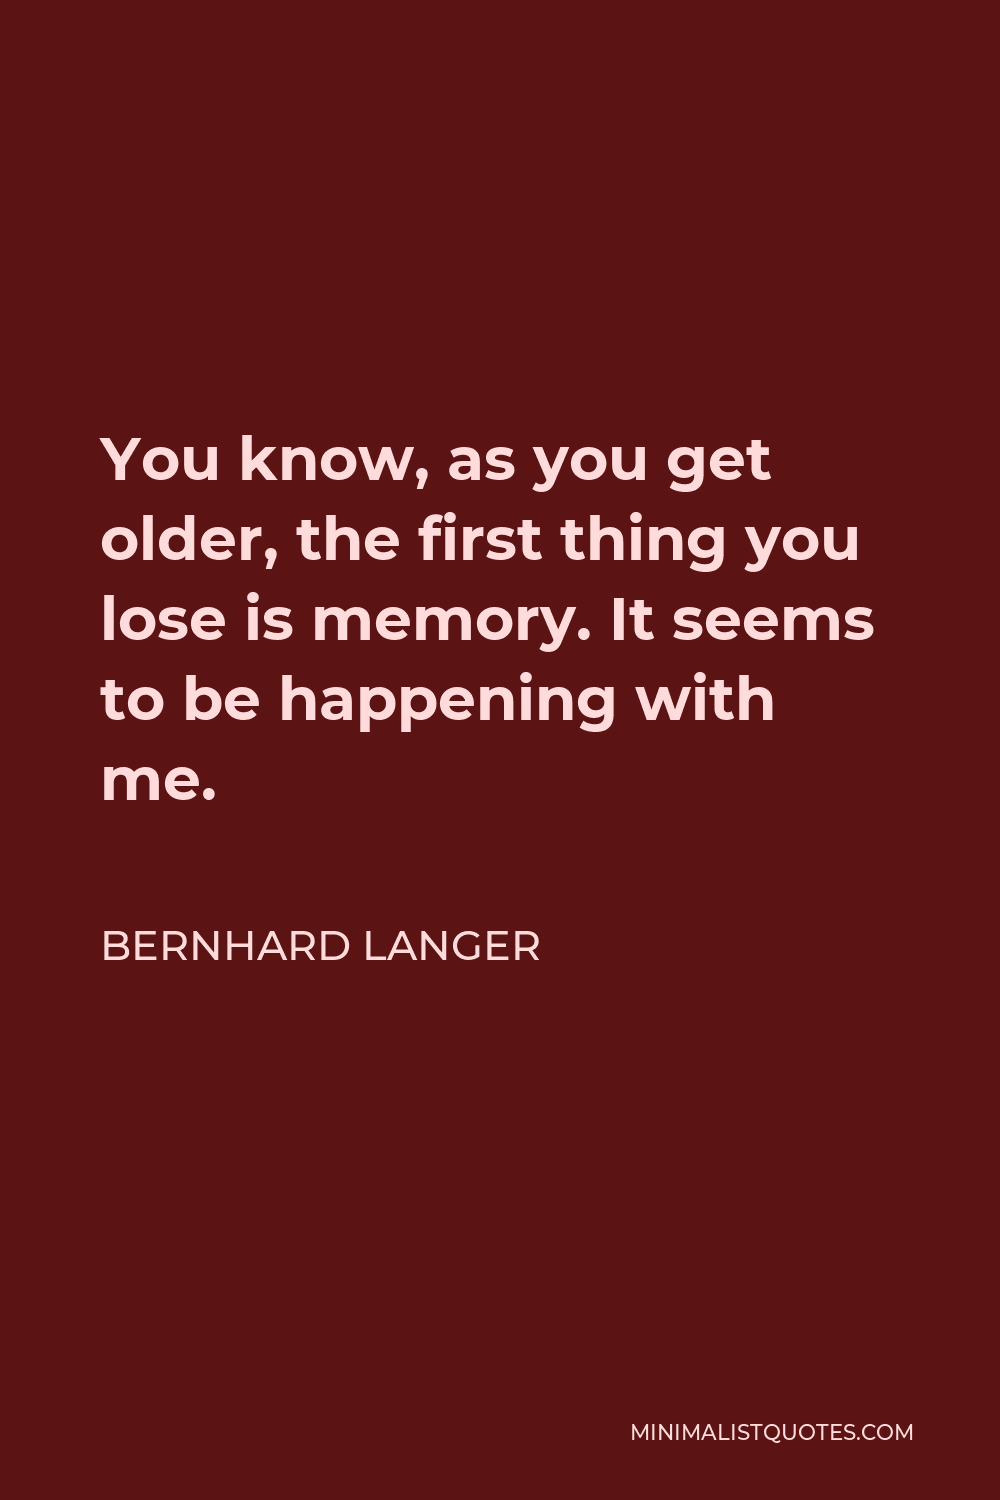 Bernhard Langer Quote - You know, as you get older, the first thing you lose is memory. It seems to be happening with me.